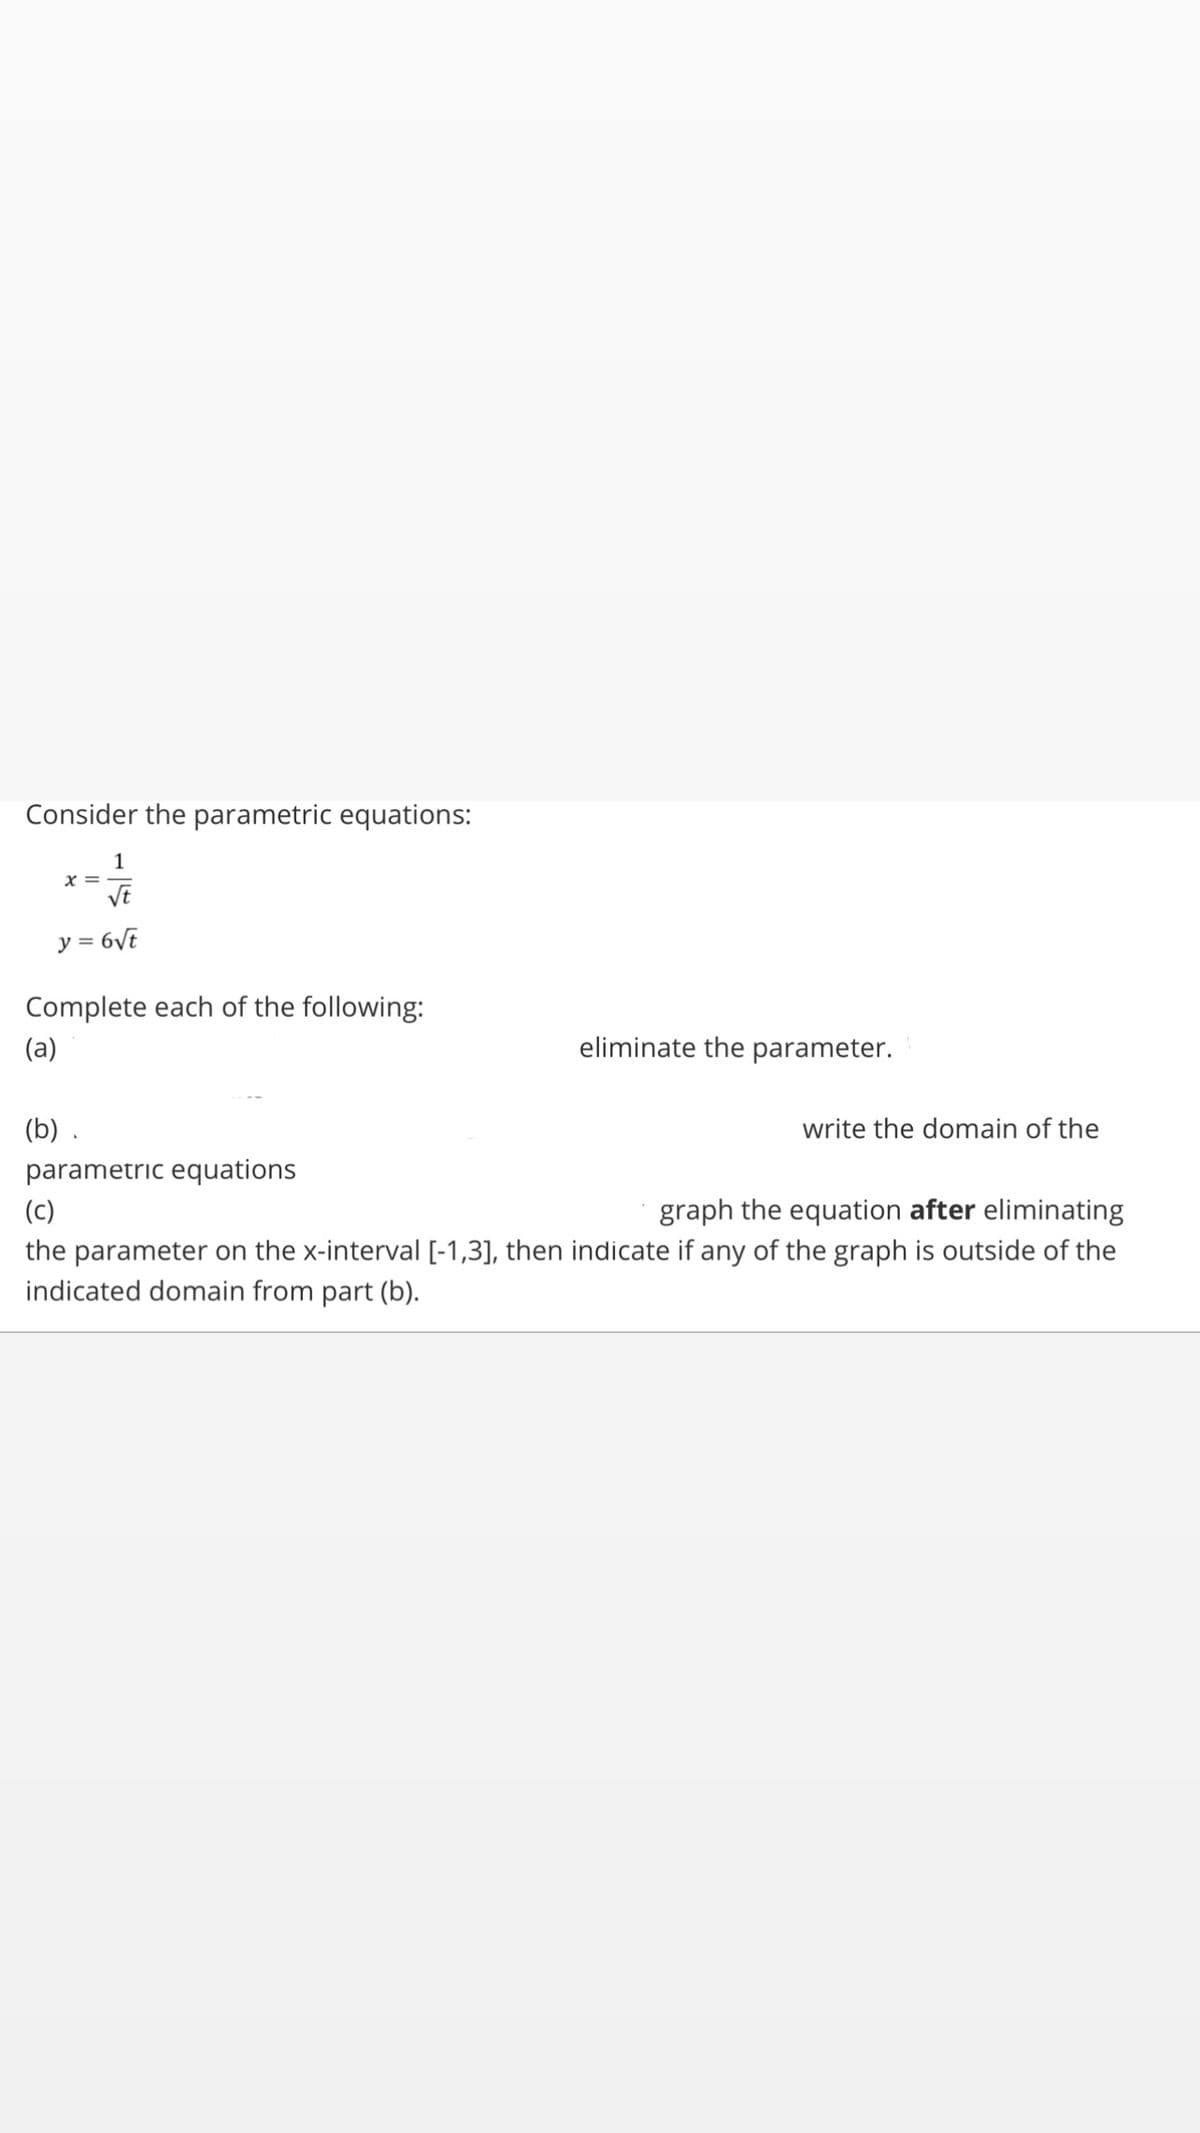 Consider the parametric equations:
1
x =
VE
y = 6Vt
Complete each of the following:
(a)
eliminate the parameter.
(b) .
write the domain of the
parametric equations
(c)
graph the equation after eliminating
the parameter on the x-interval [-1,3], then indicate if any of the graph is outside of the
indicated domain from part (b).
